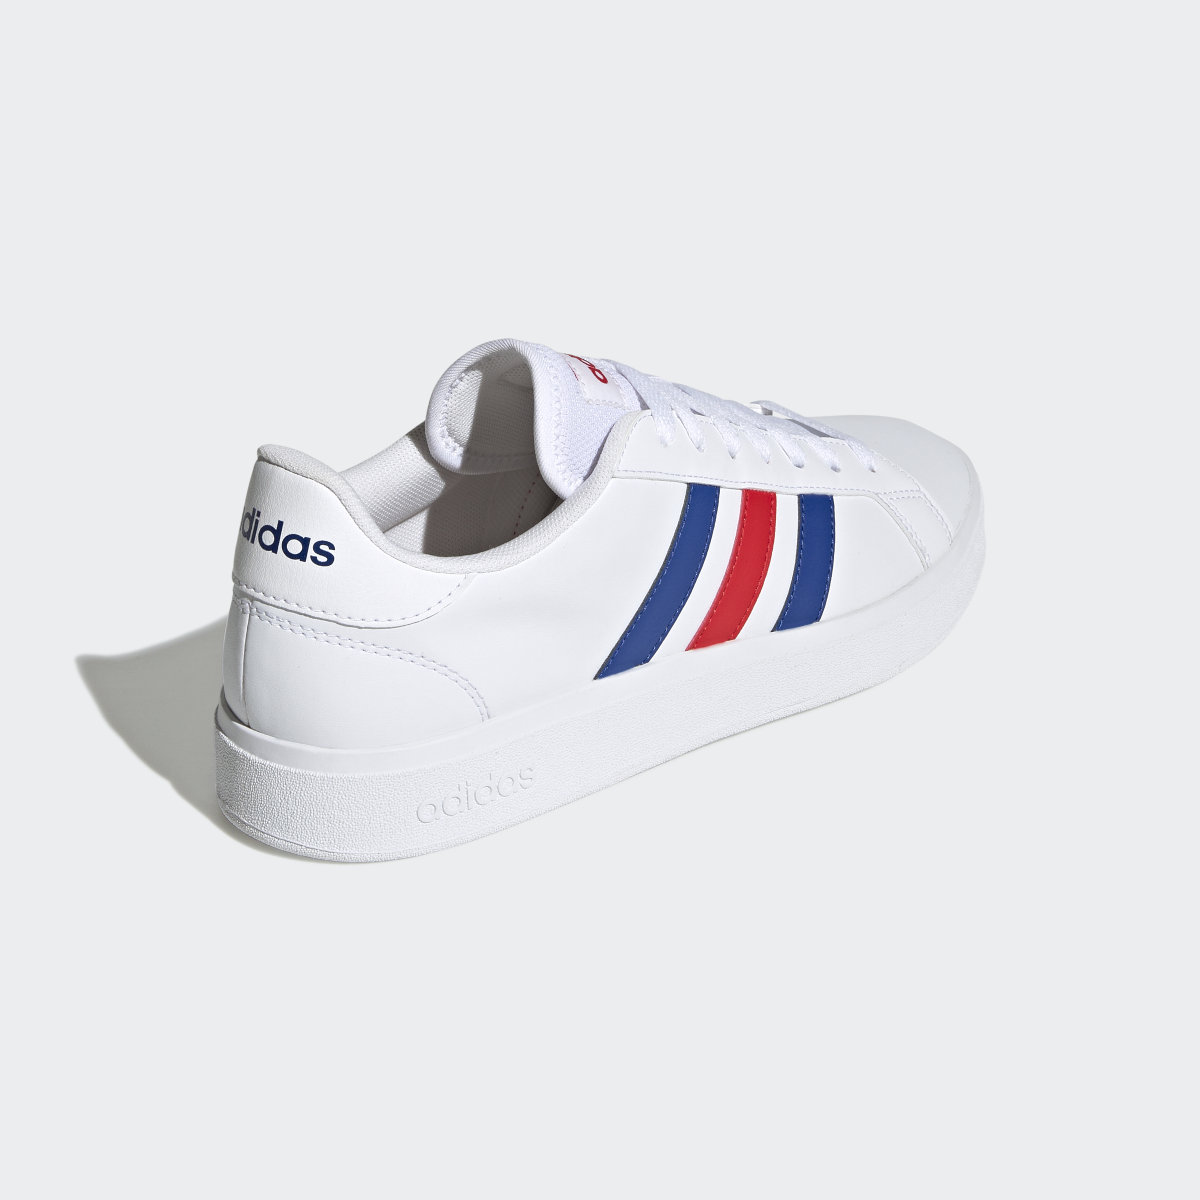 Adidas Grand Court TD Lifestyle Court Casual Shoes. 6